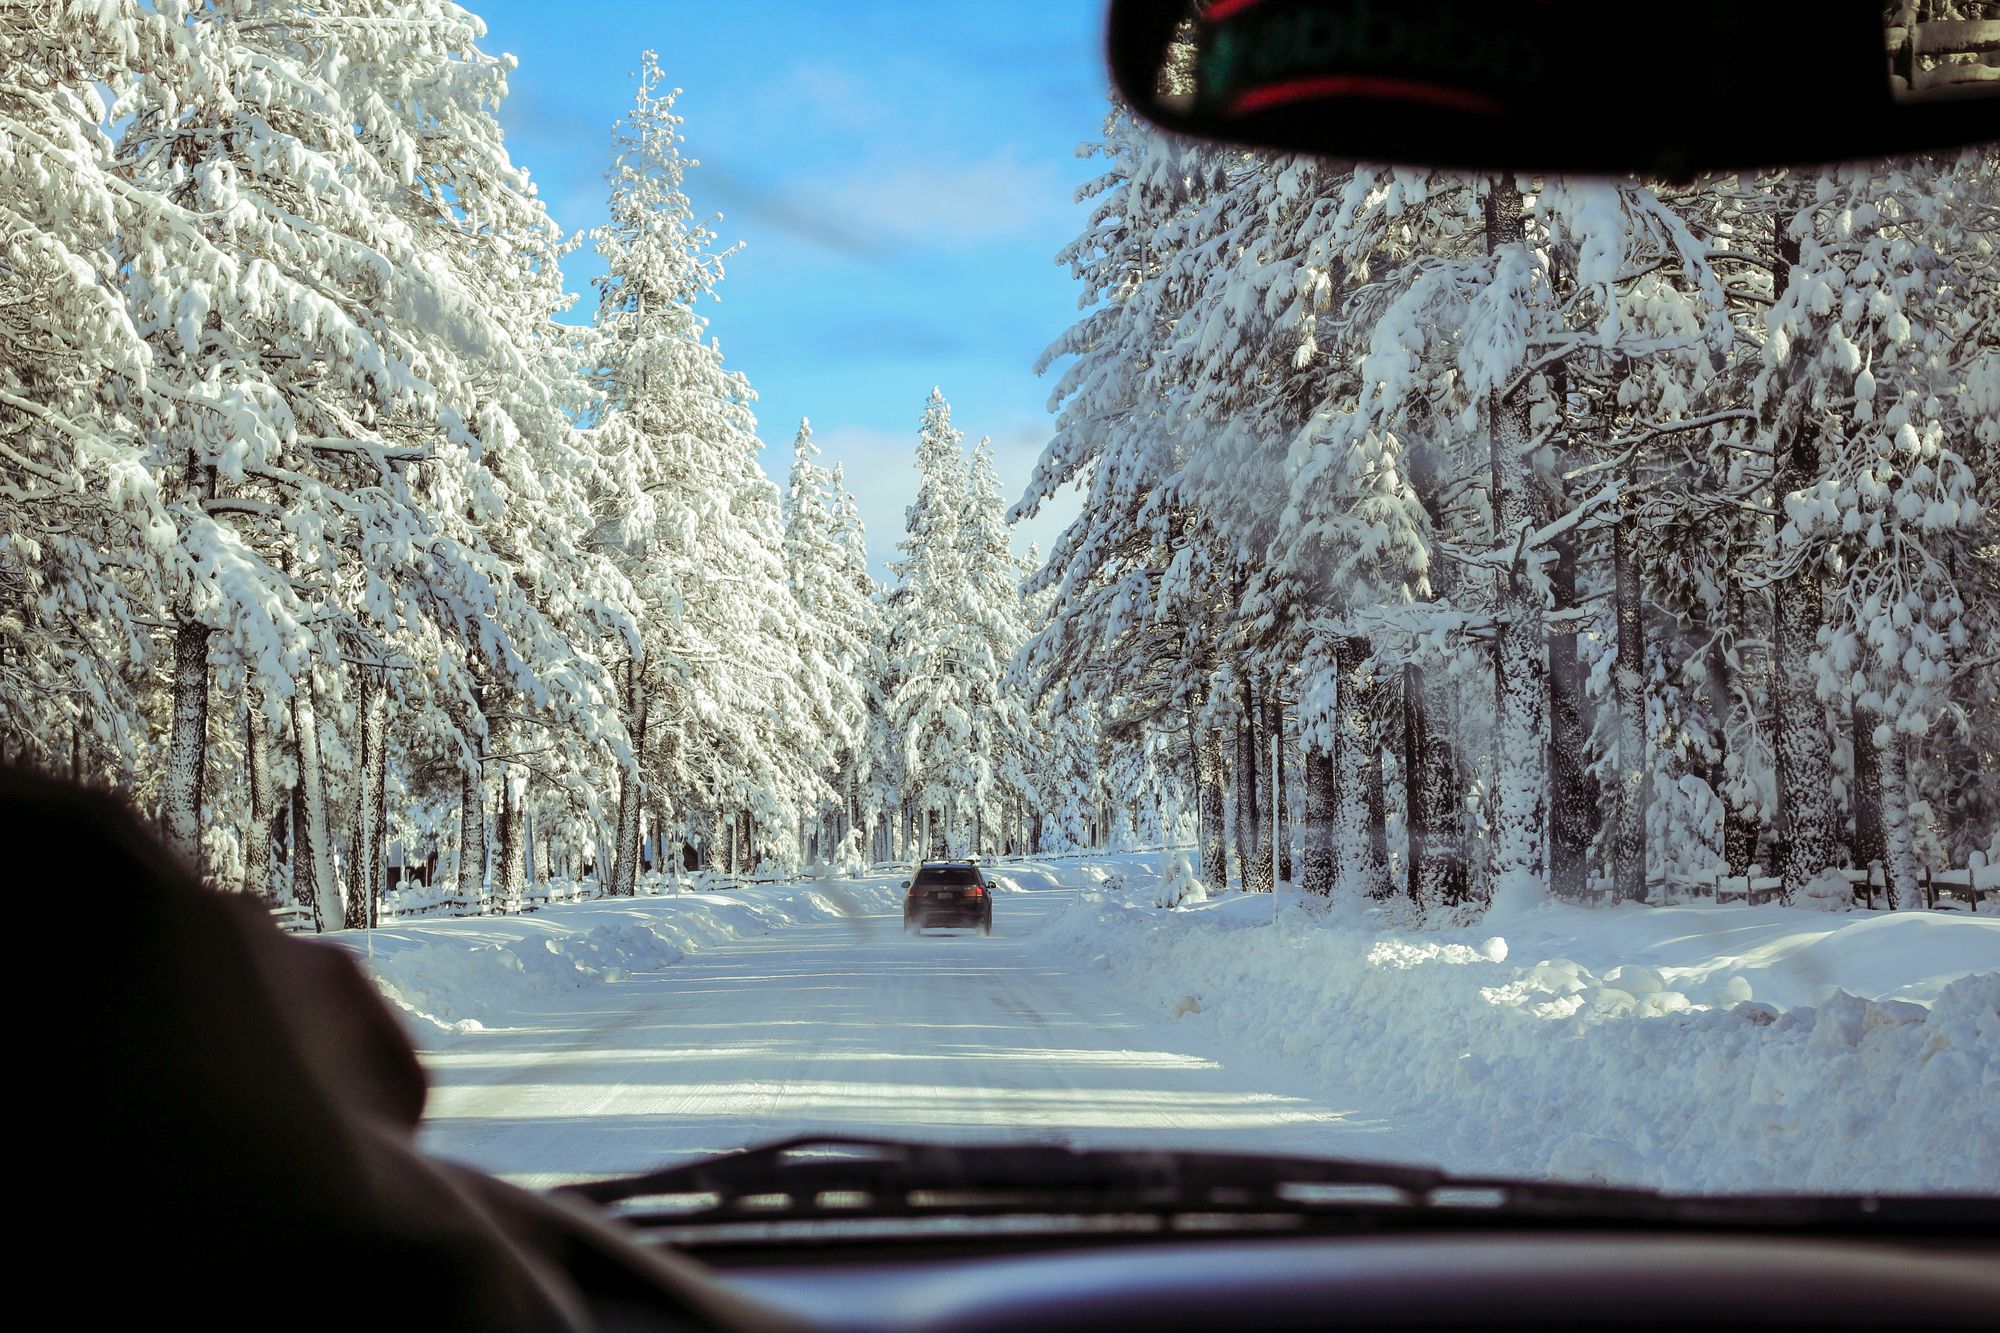 Safe driving tips for winter weather conditions